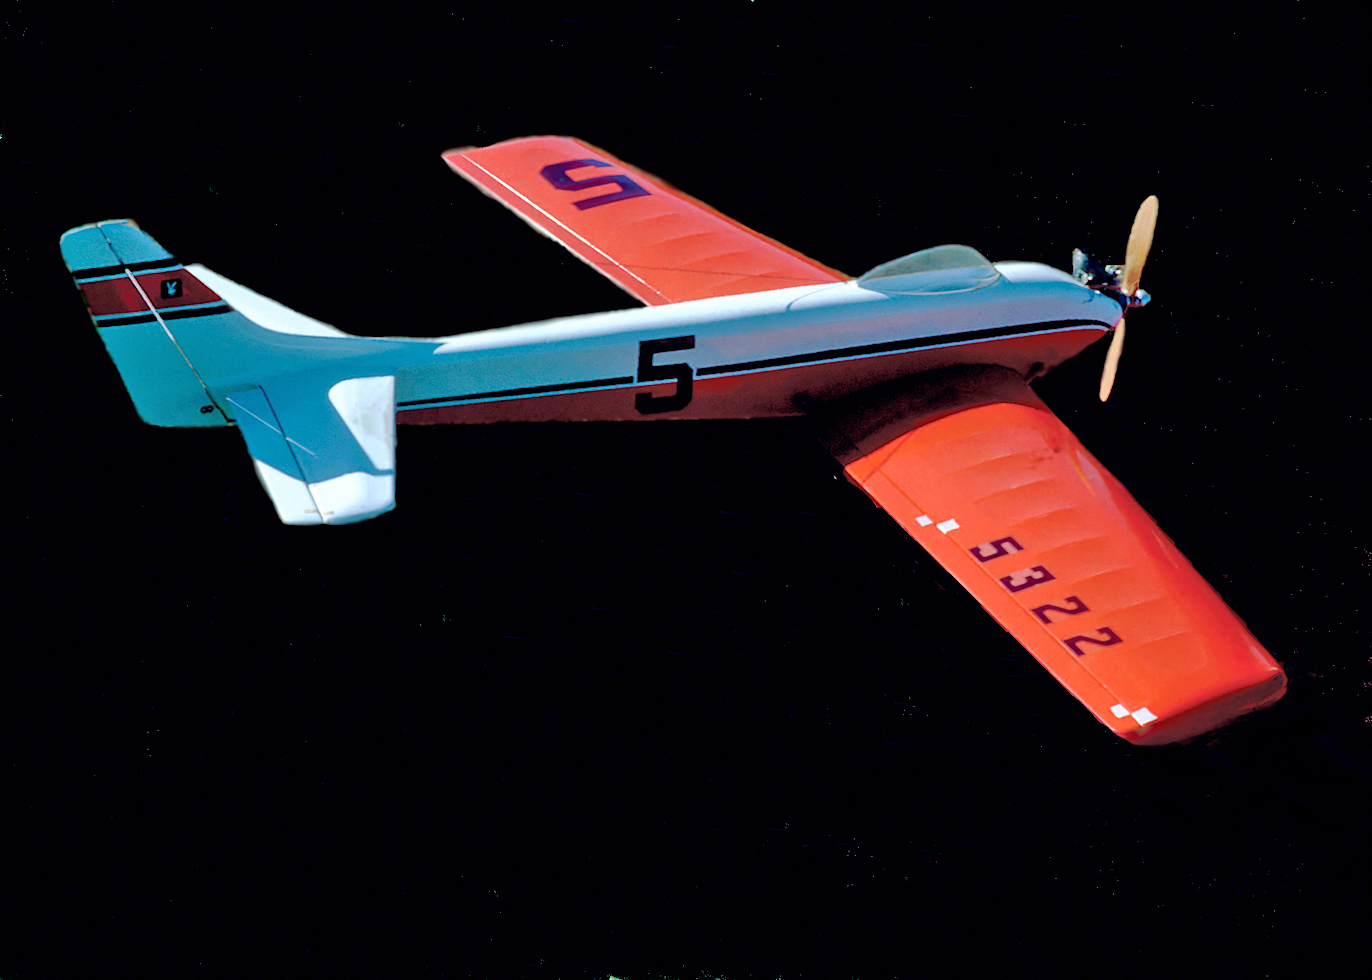 There was constant experimentation in the era of these models. Howard Thombs flew this swept-wing version of the Taurus.